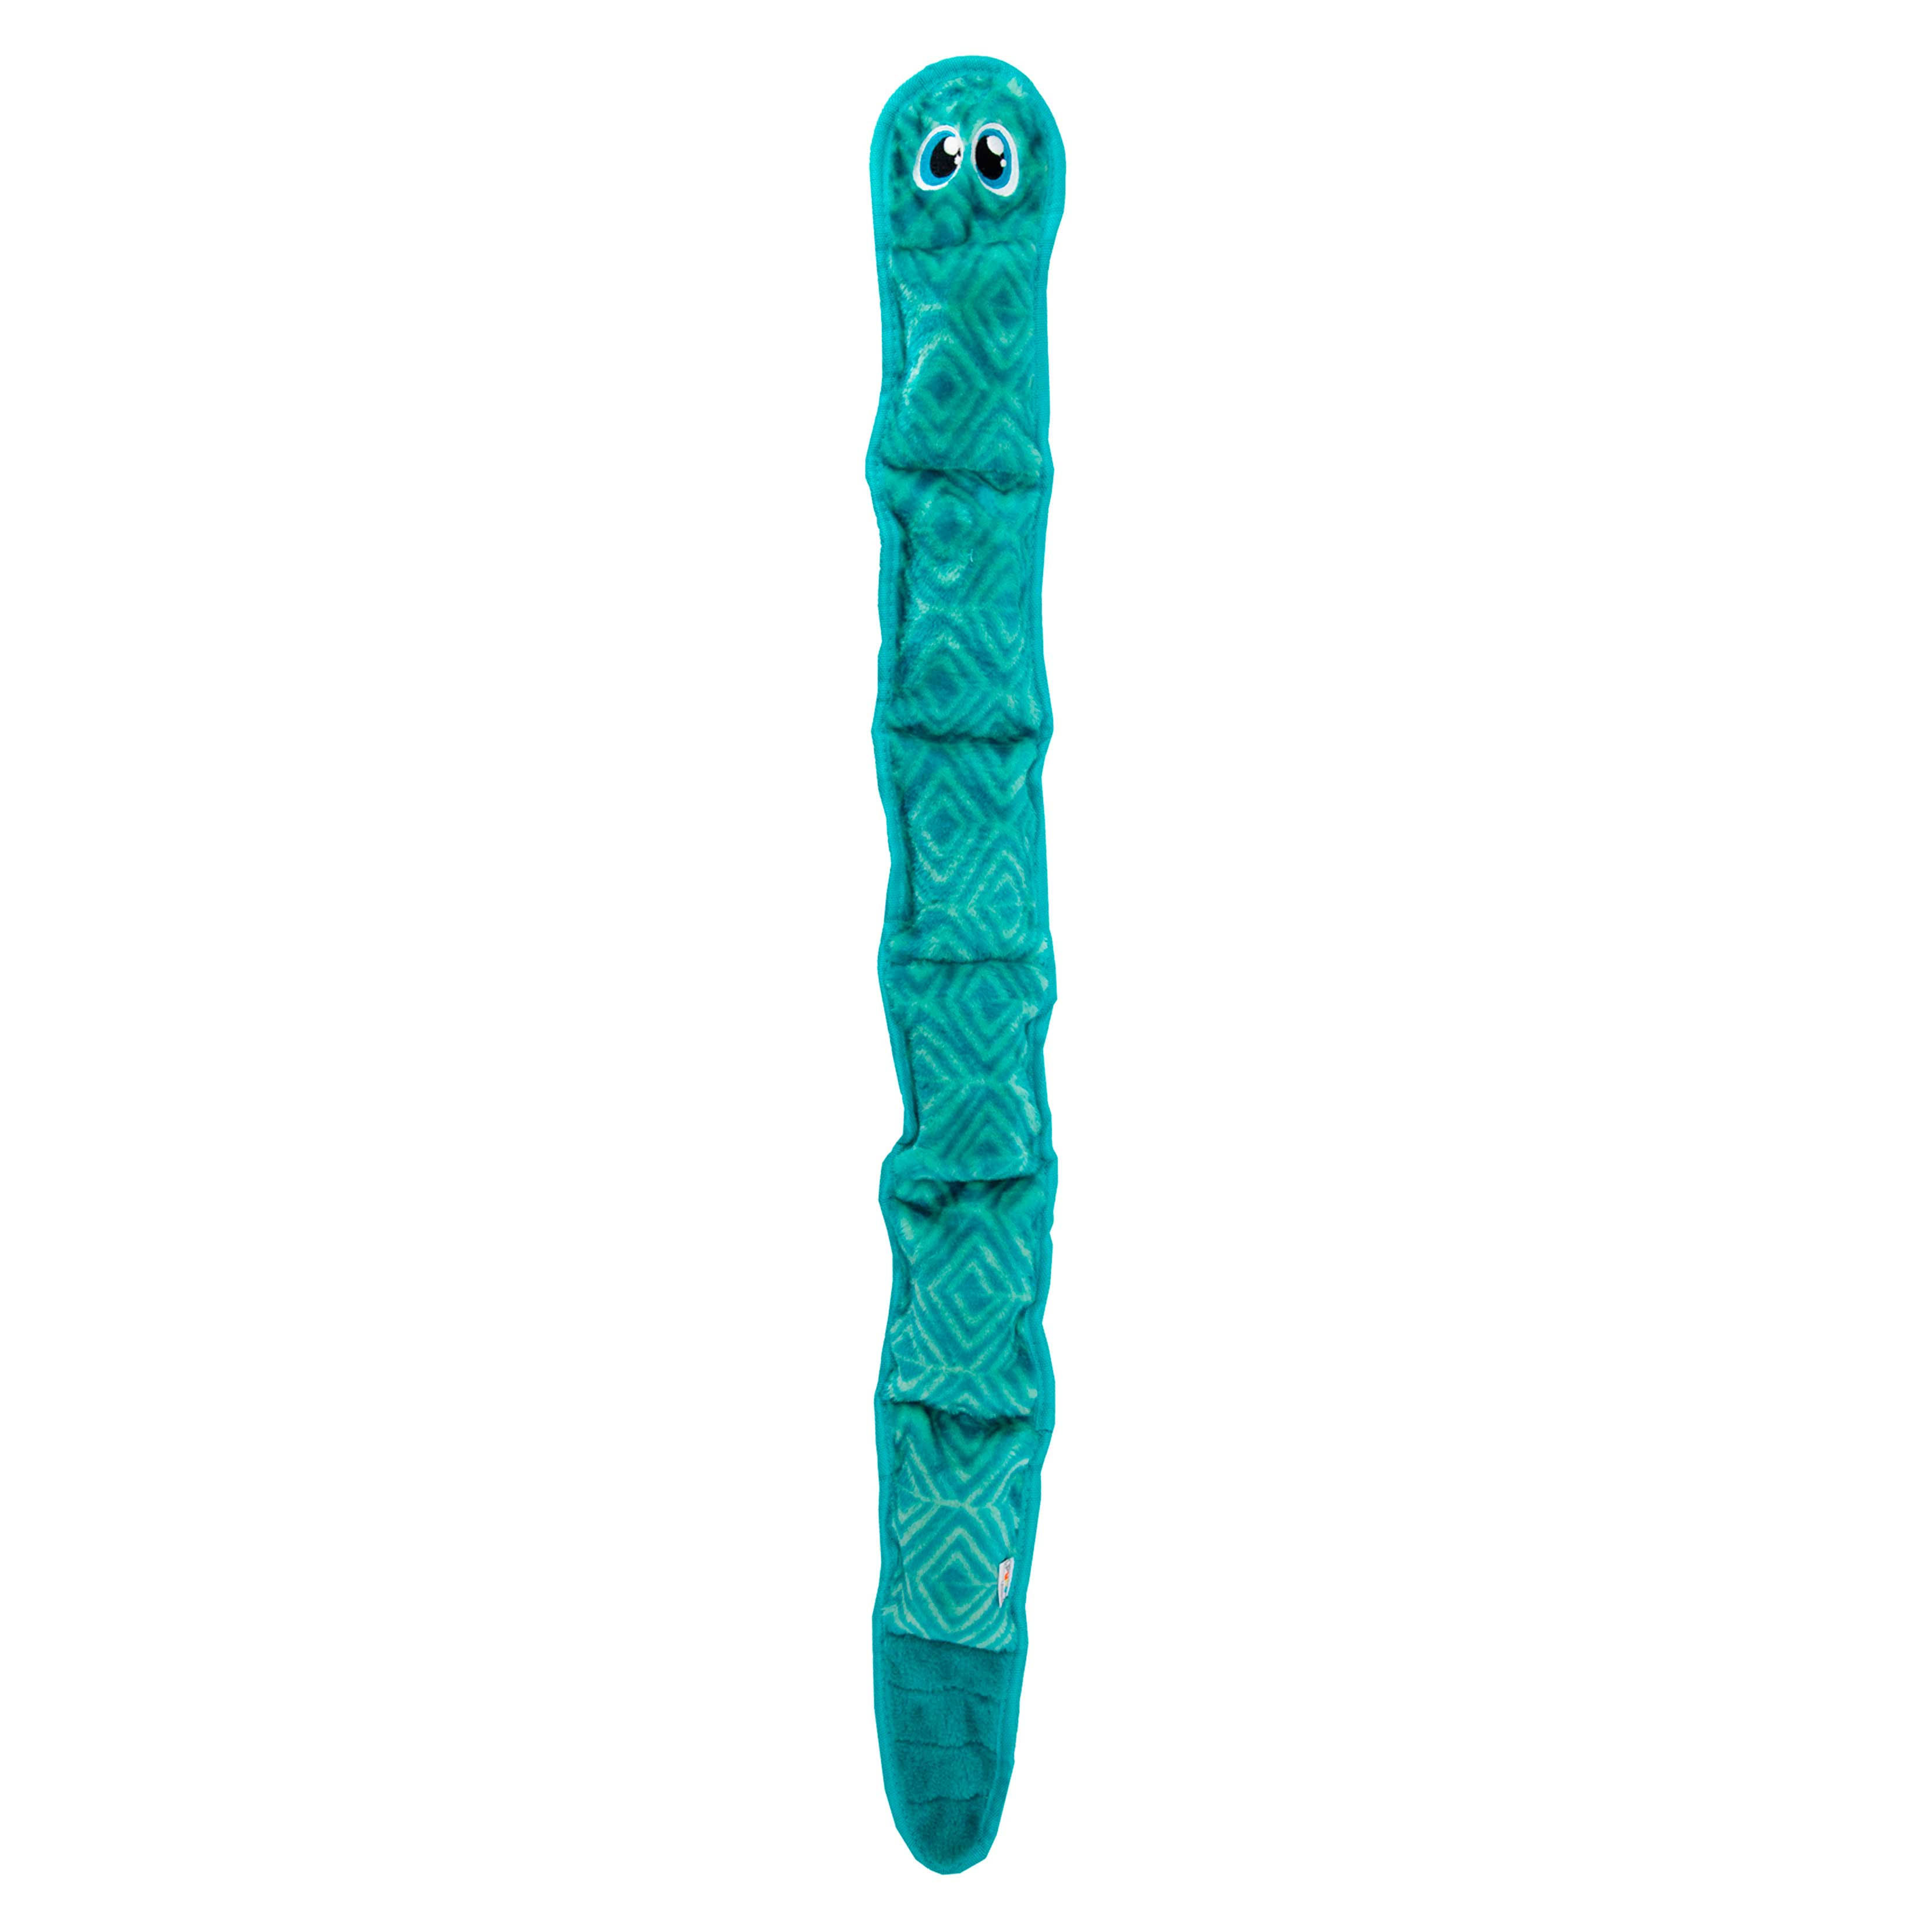 Outward Hound Invincibles Turquoise Snake Plush Dog Toy XL